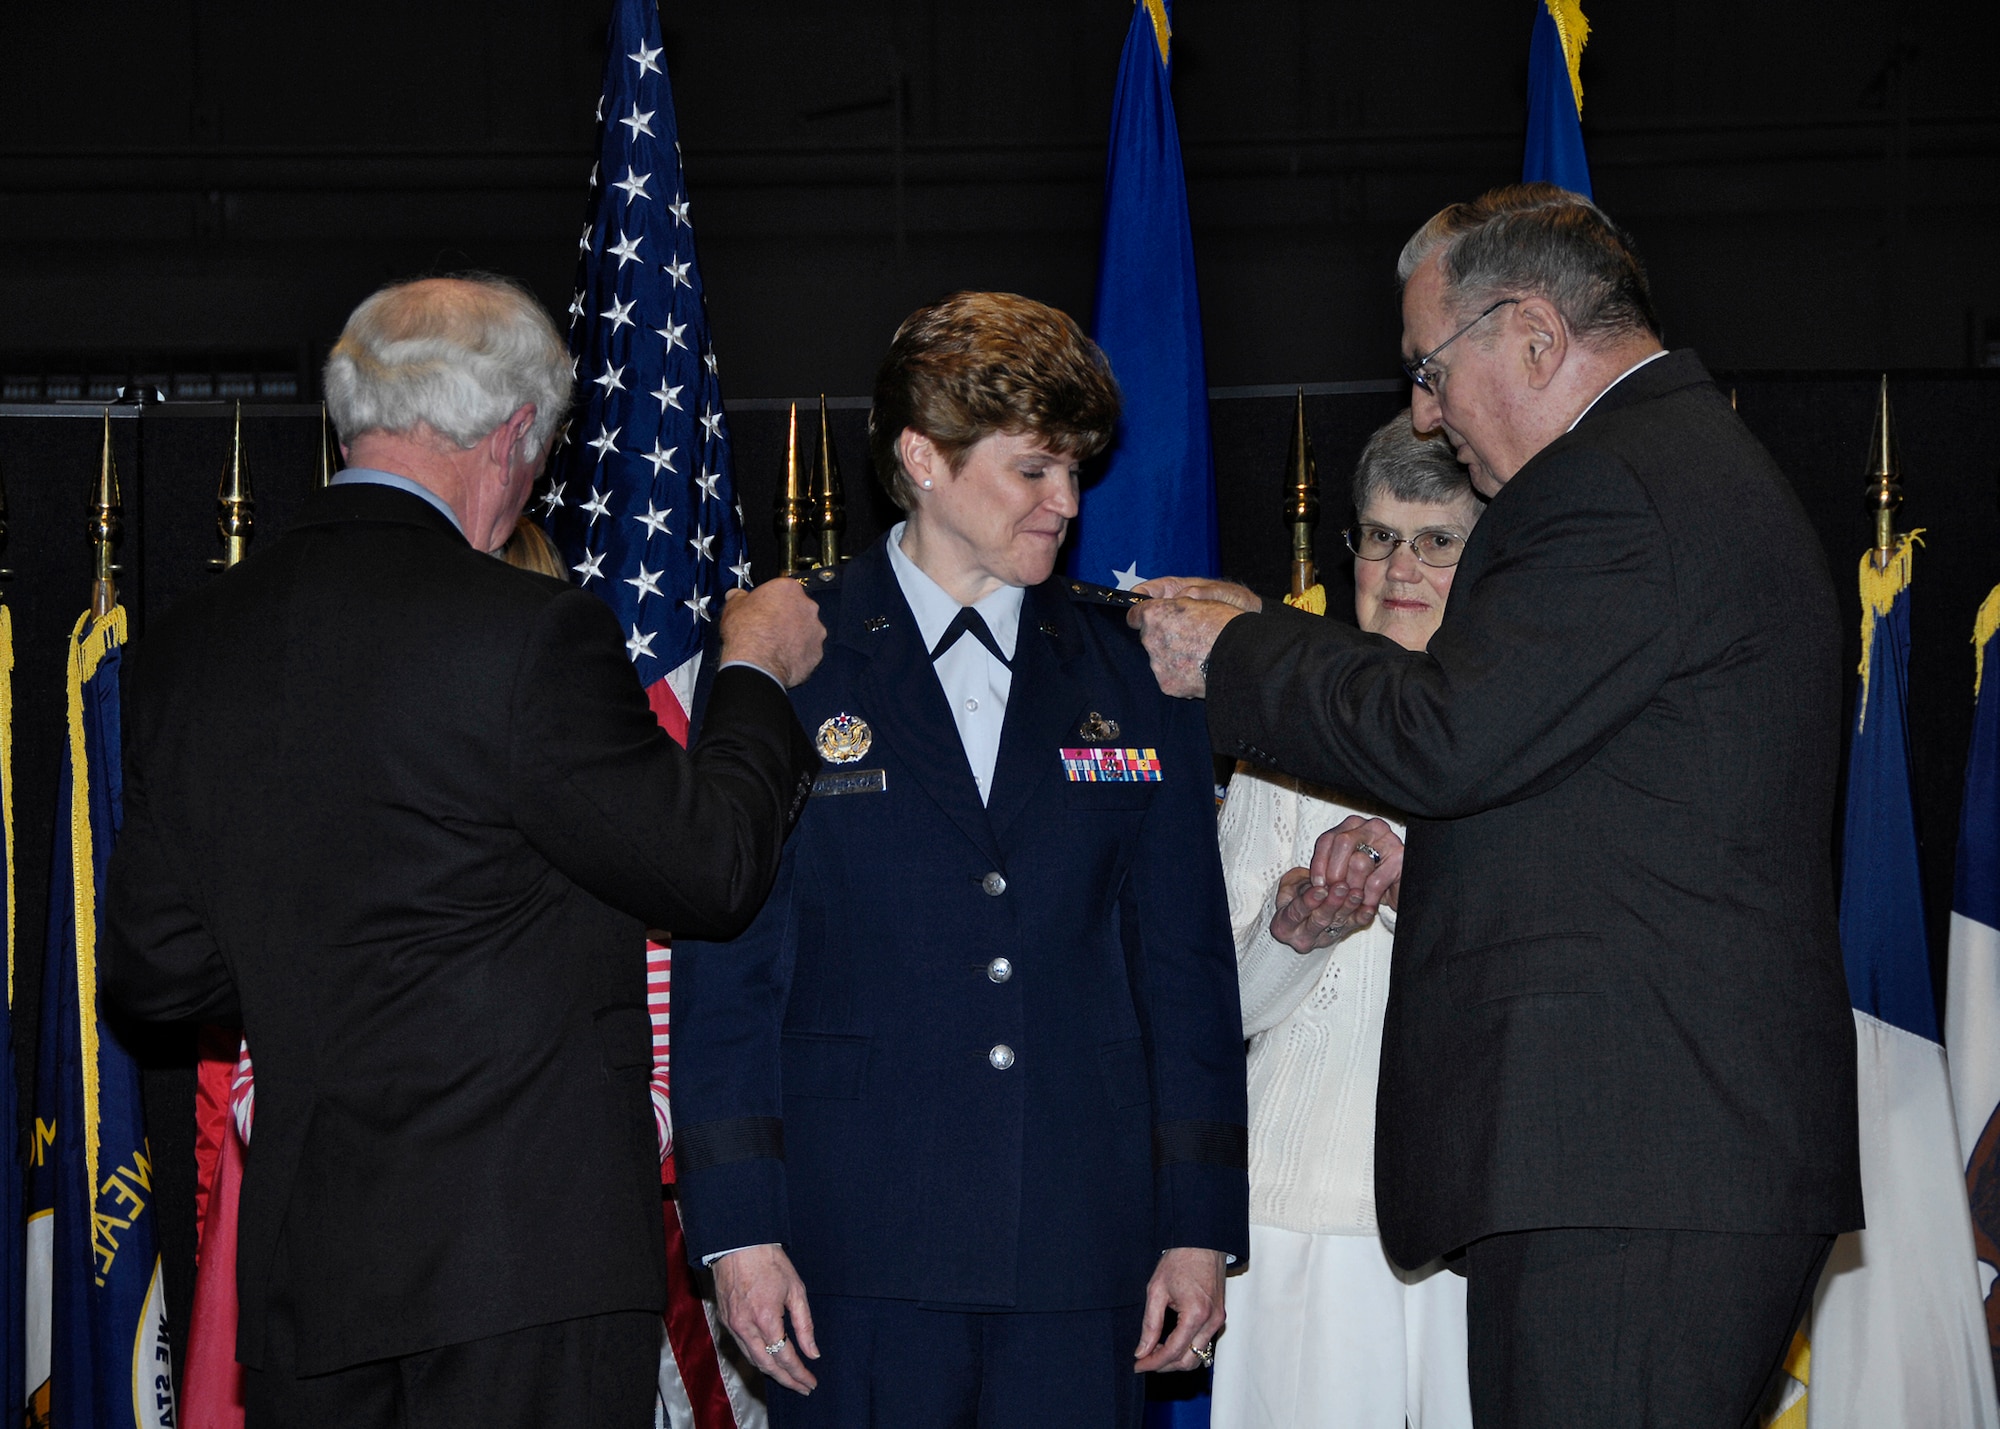 Lt. Gen. Janet C. Wolfenbarger's gets a little help from her family, who helped pin on her three-star rank during a promotion ceremony Dec. 30 at the National Museum of the United States Air Force.  This official ceremony followed the Dec. 4 confirmation by the U. S. Senate of the generals promotion and appointment.  (U.S. Air Force Photo/Mike Libecap) 